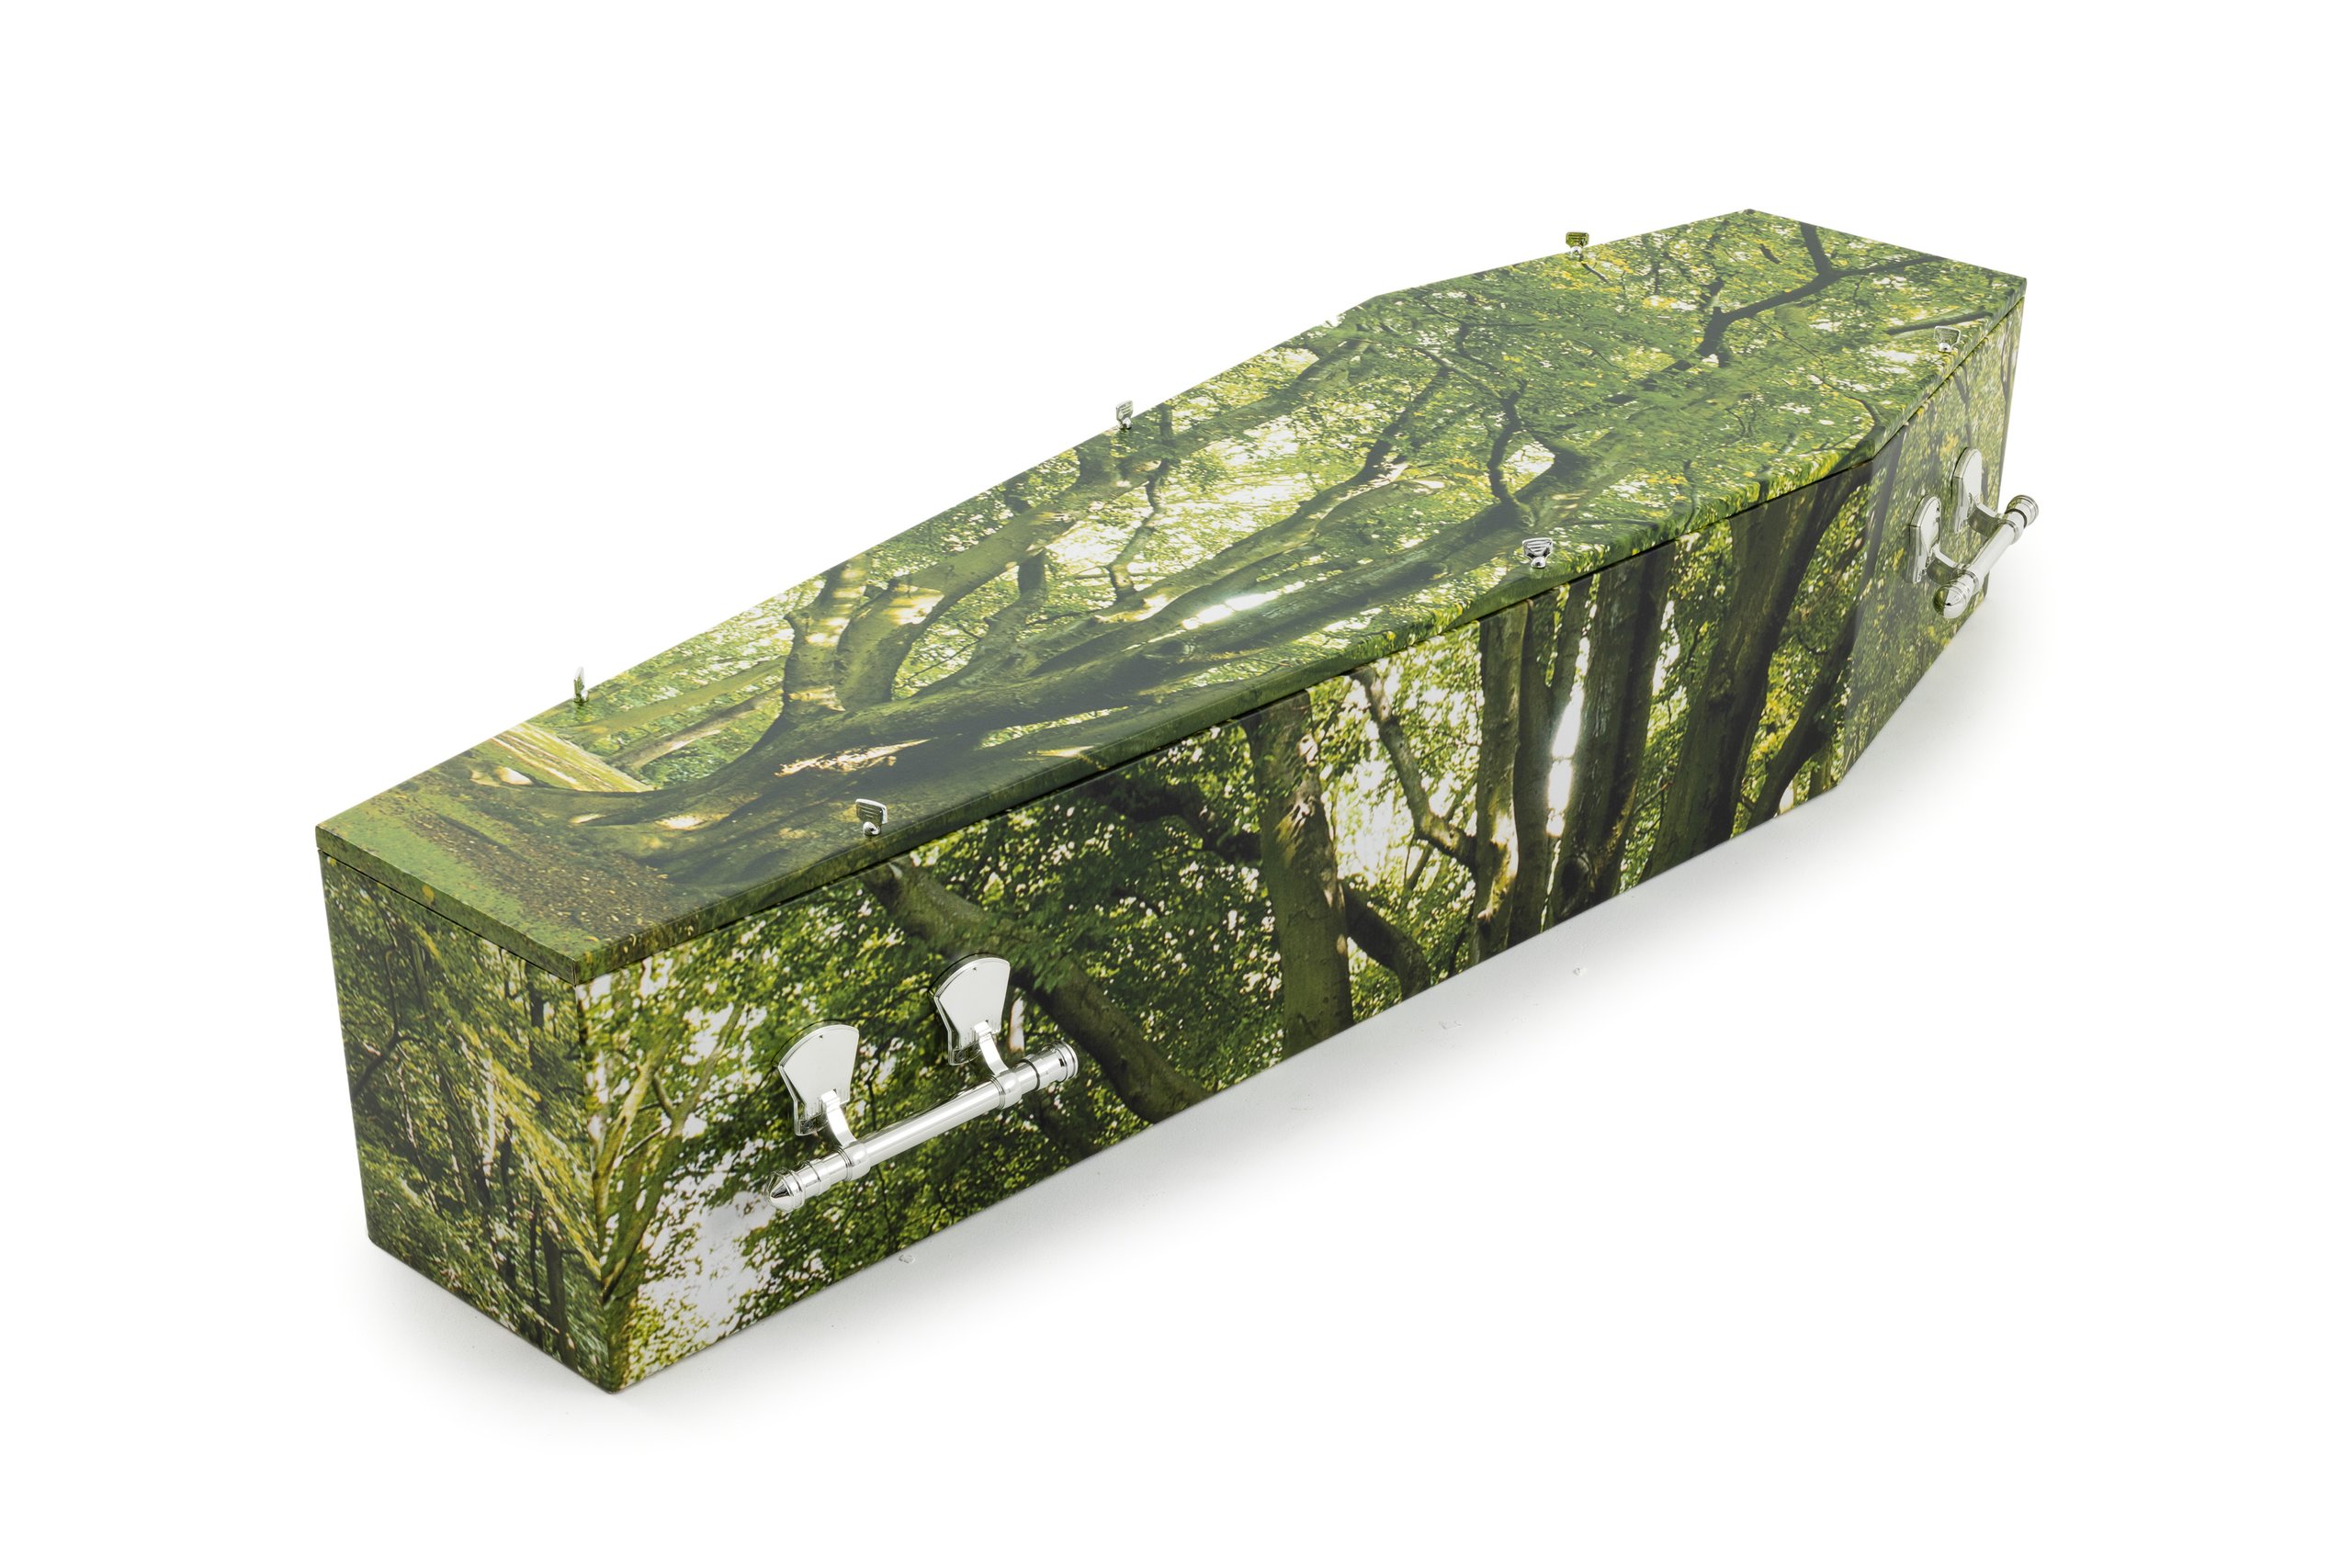 'Stately Tree' cardboard coffin by LifeArt Australia